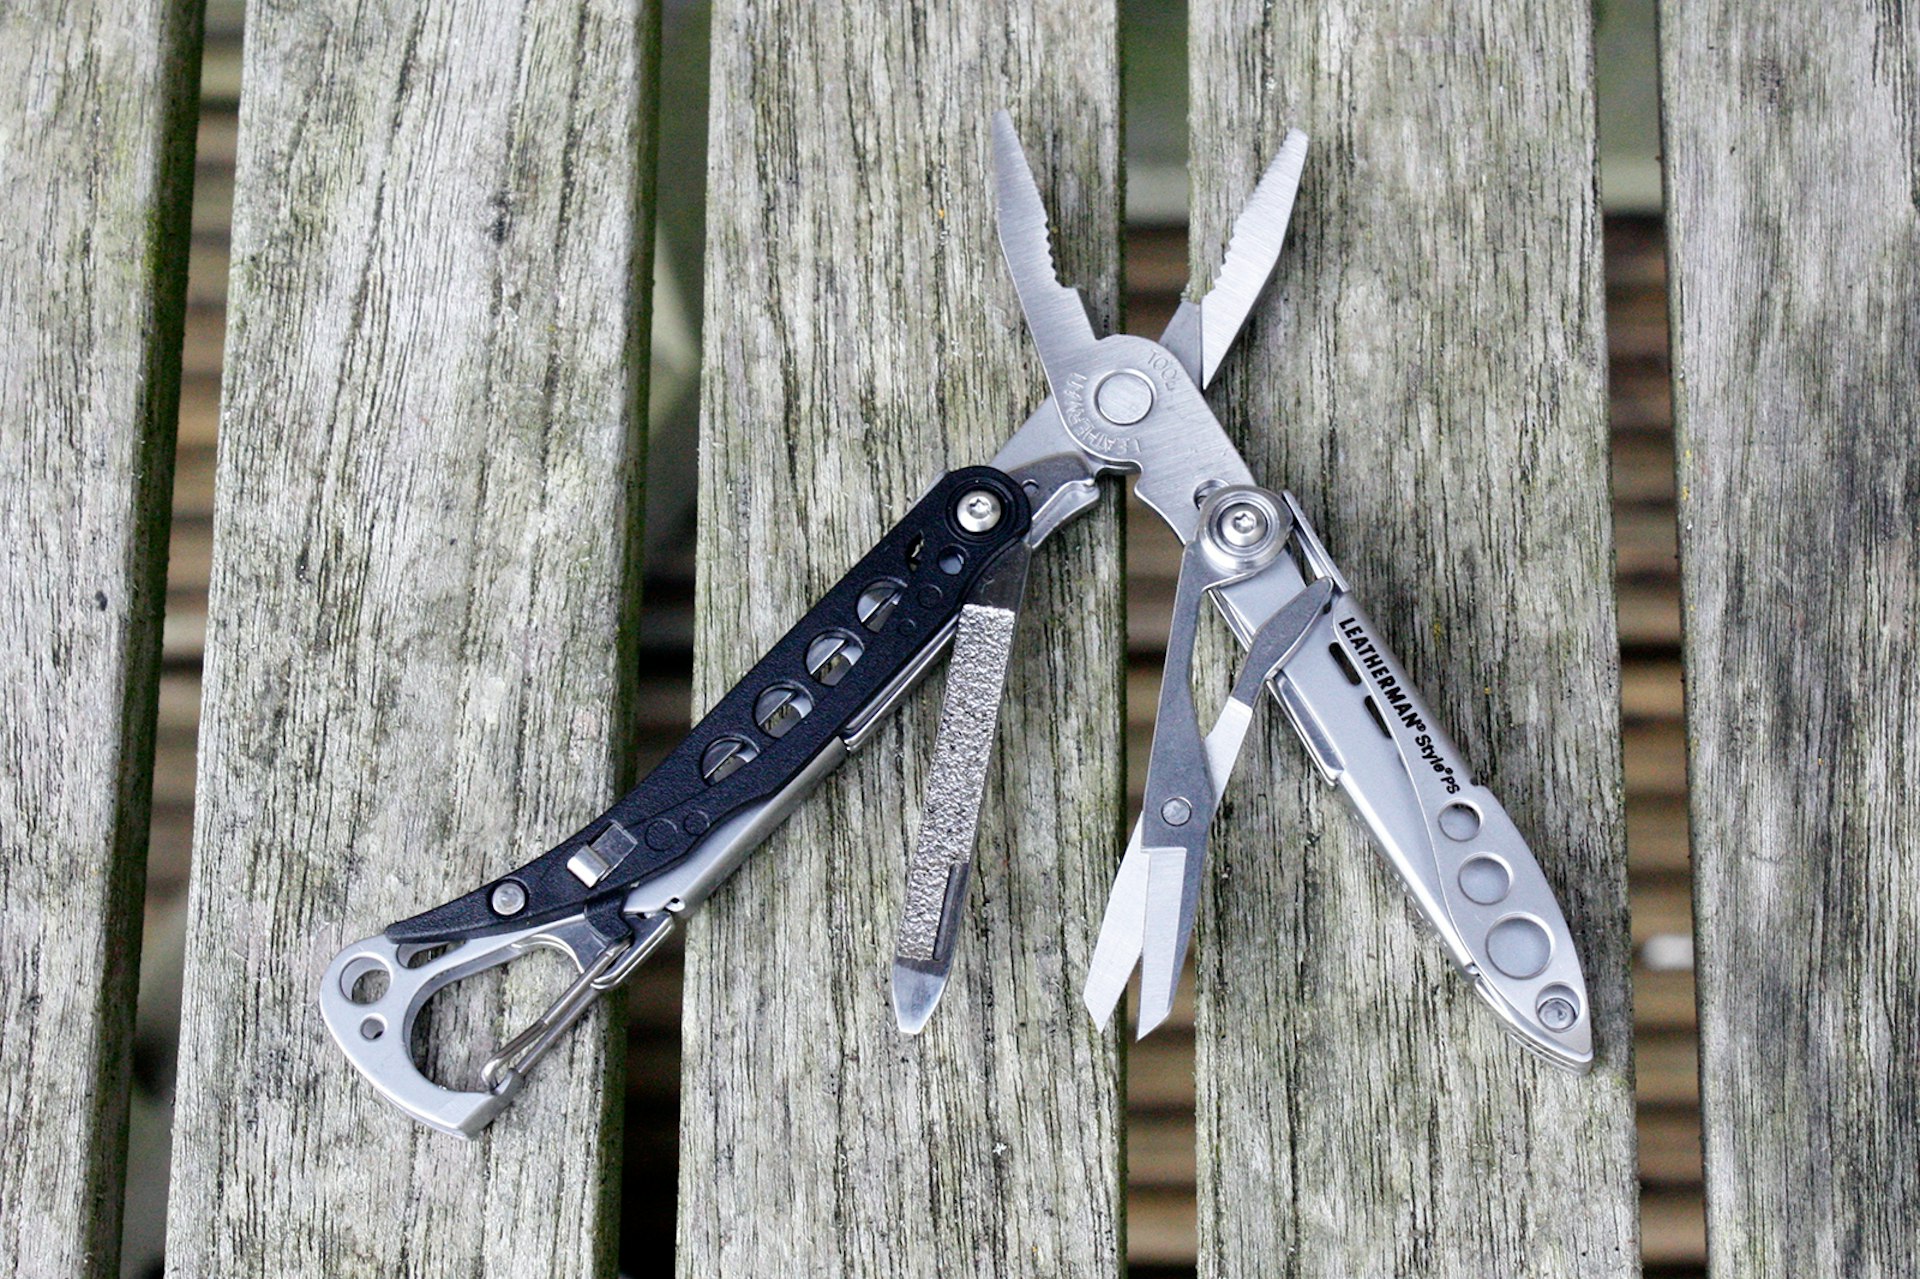 The Leatherman Style PS multitool © David Else / Lonely Planet